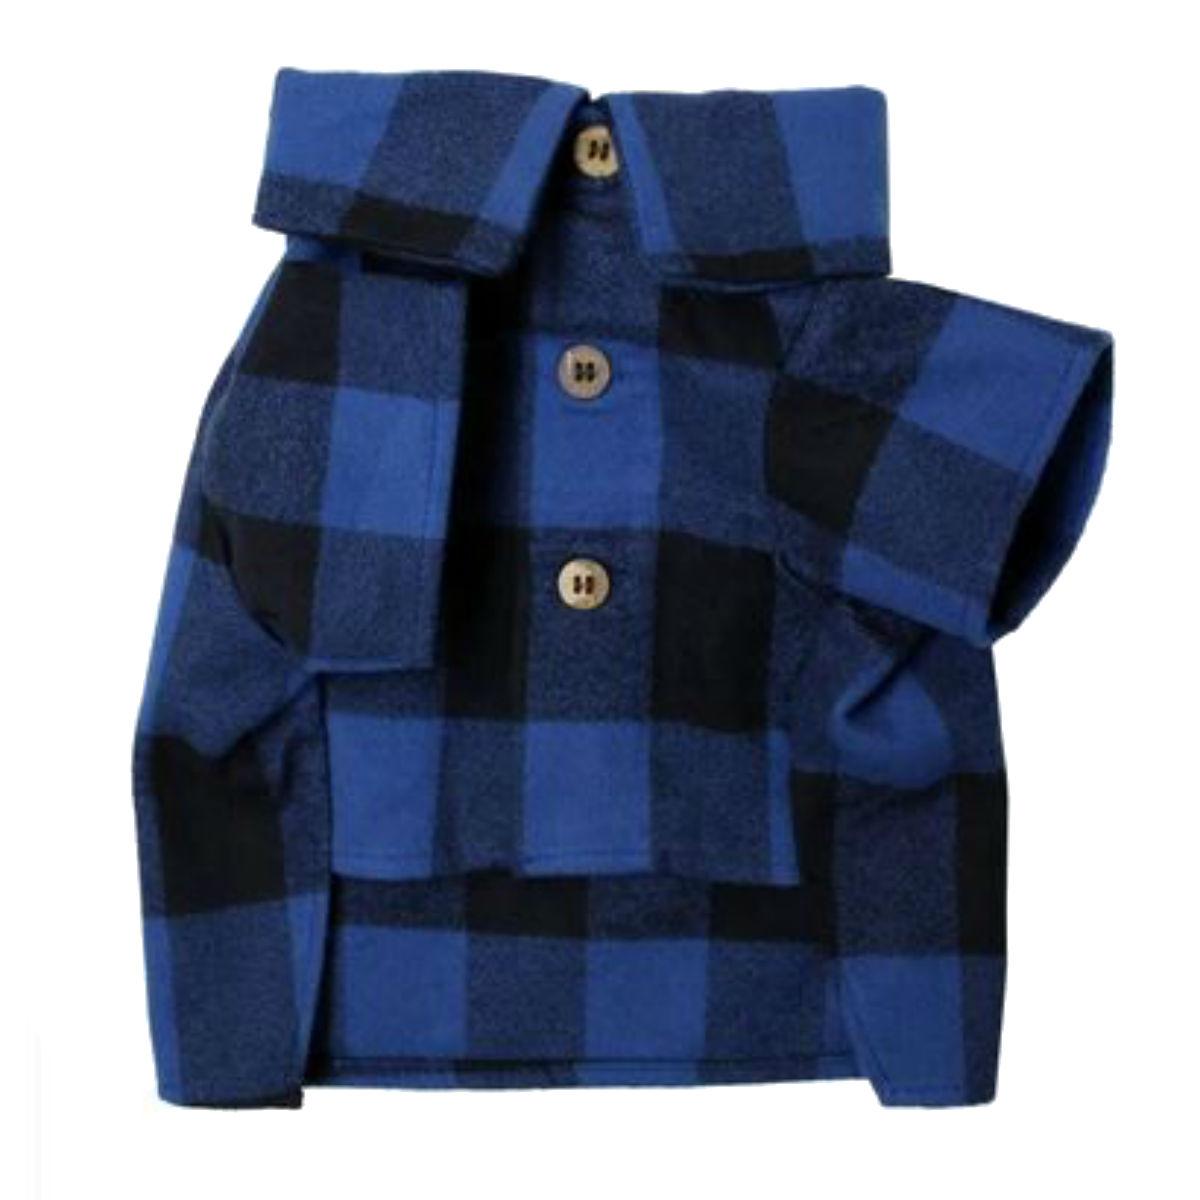 Dog Threads Pacifica Flannel Dog Shirt - Blue and Black Plaid